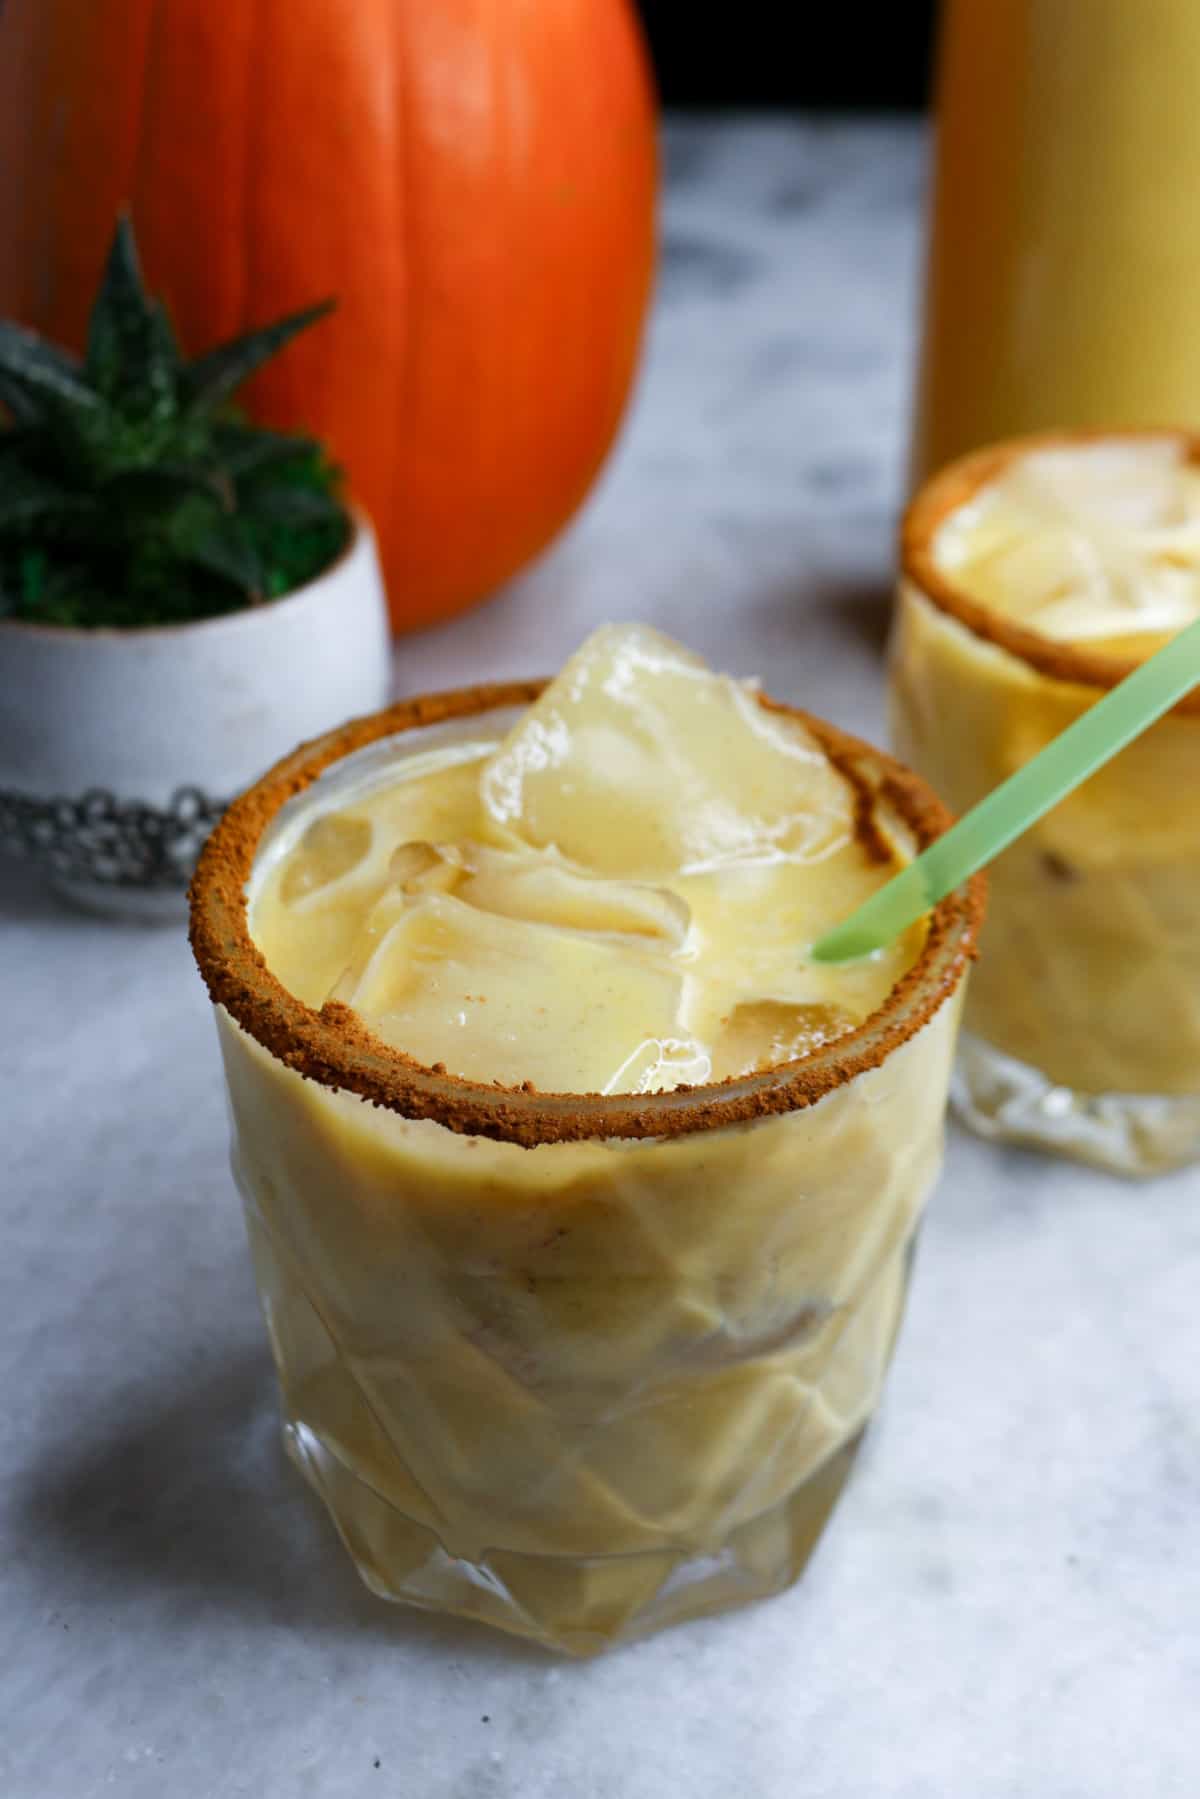 Pumpkin Spice Horchata in a clear glass with a green straw